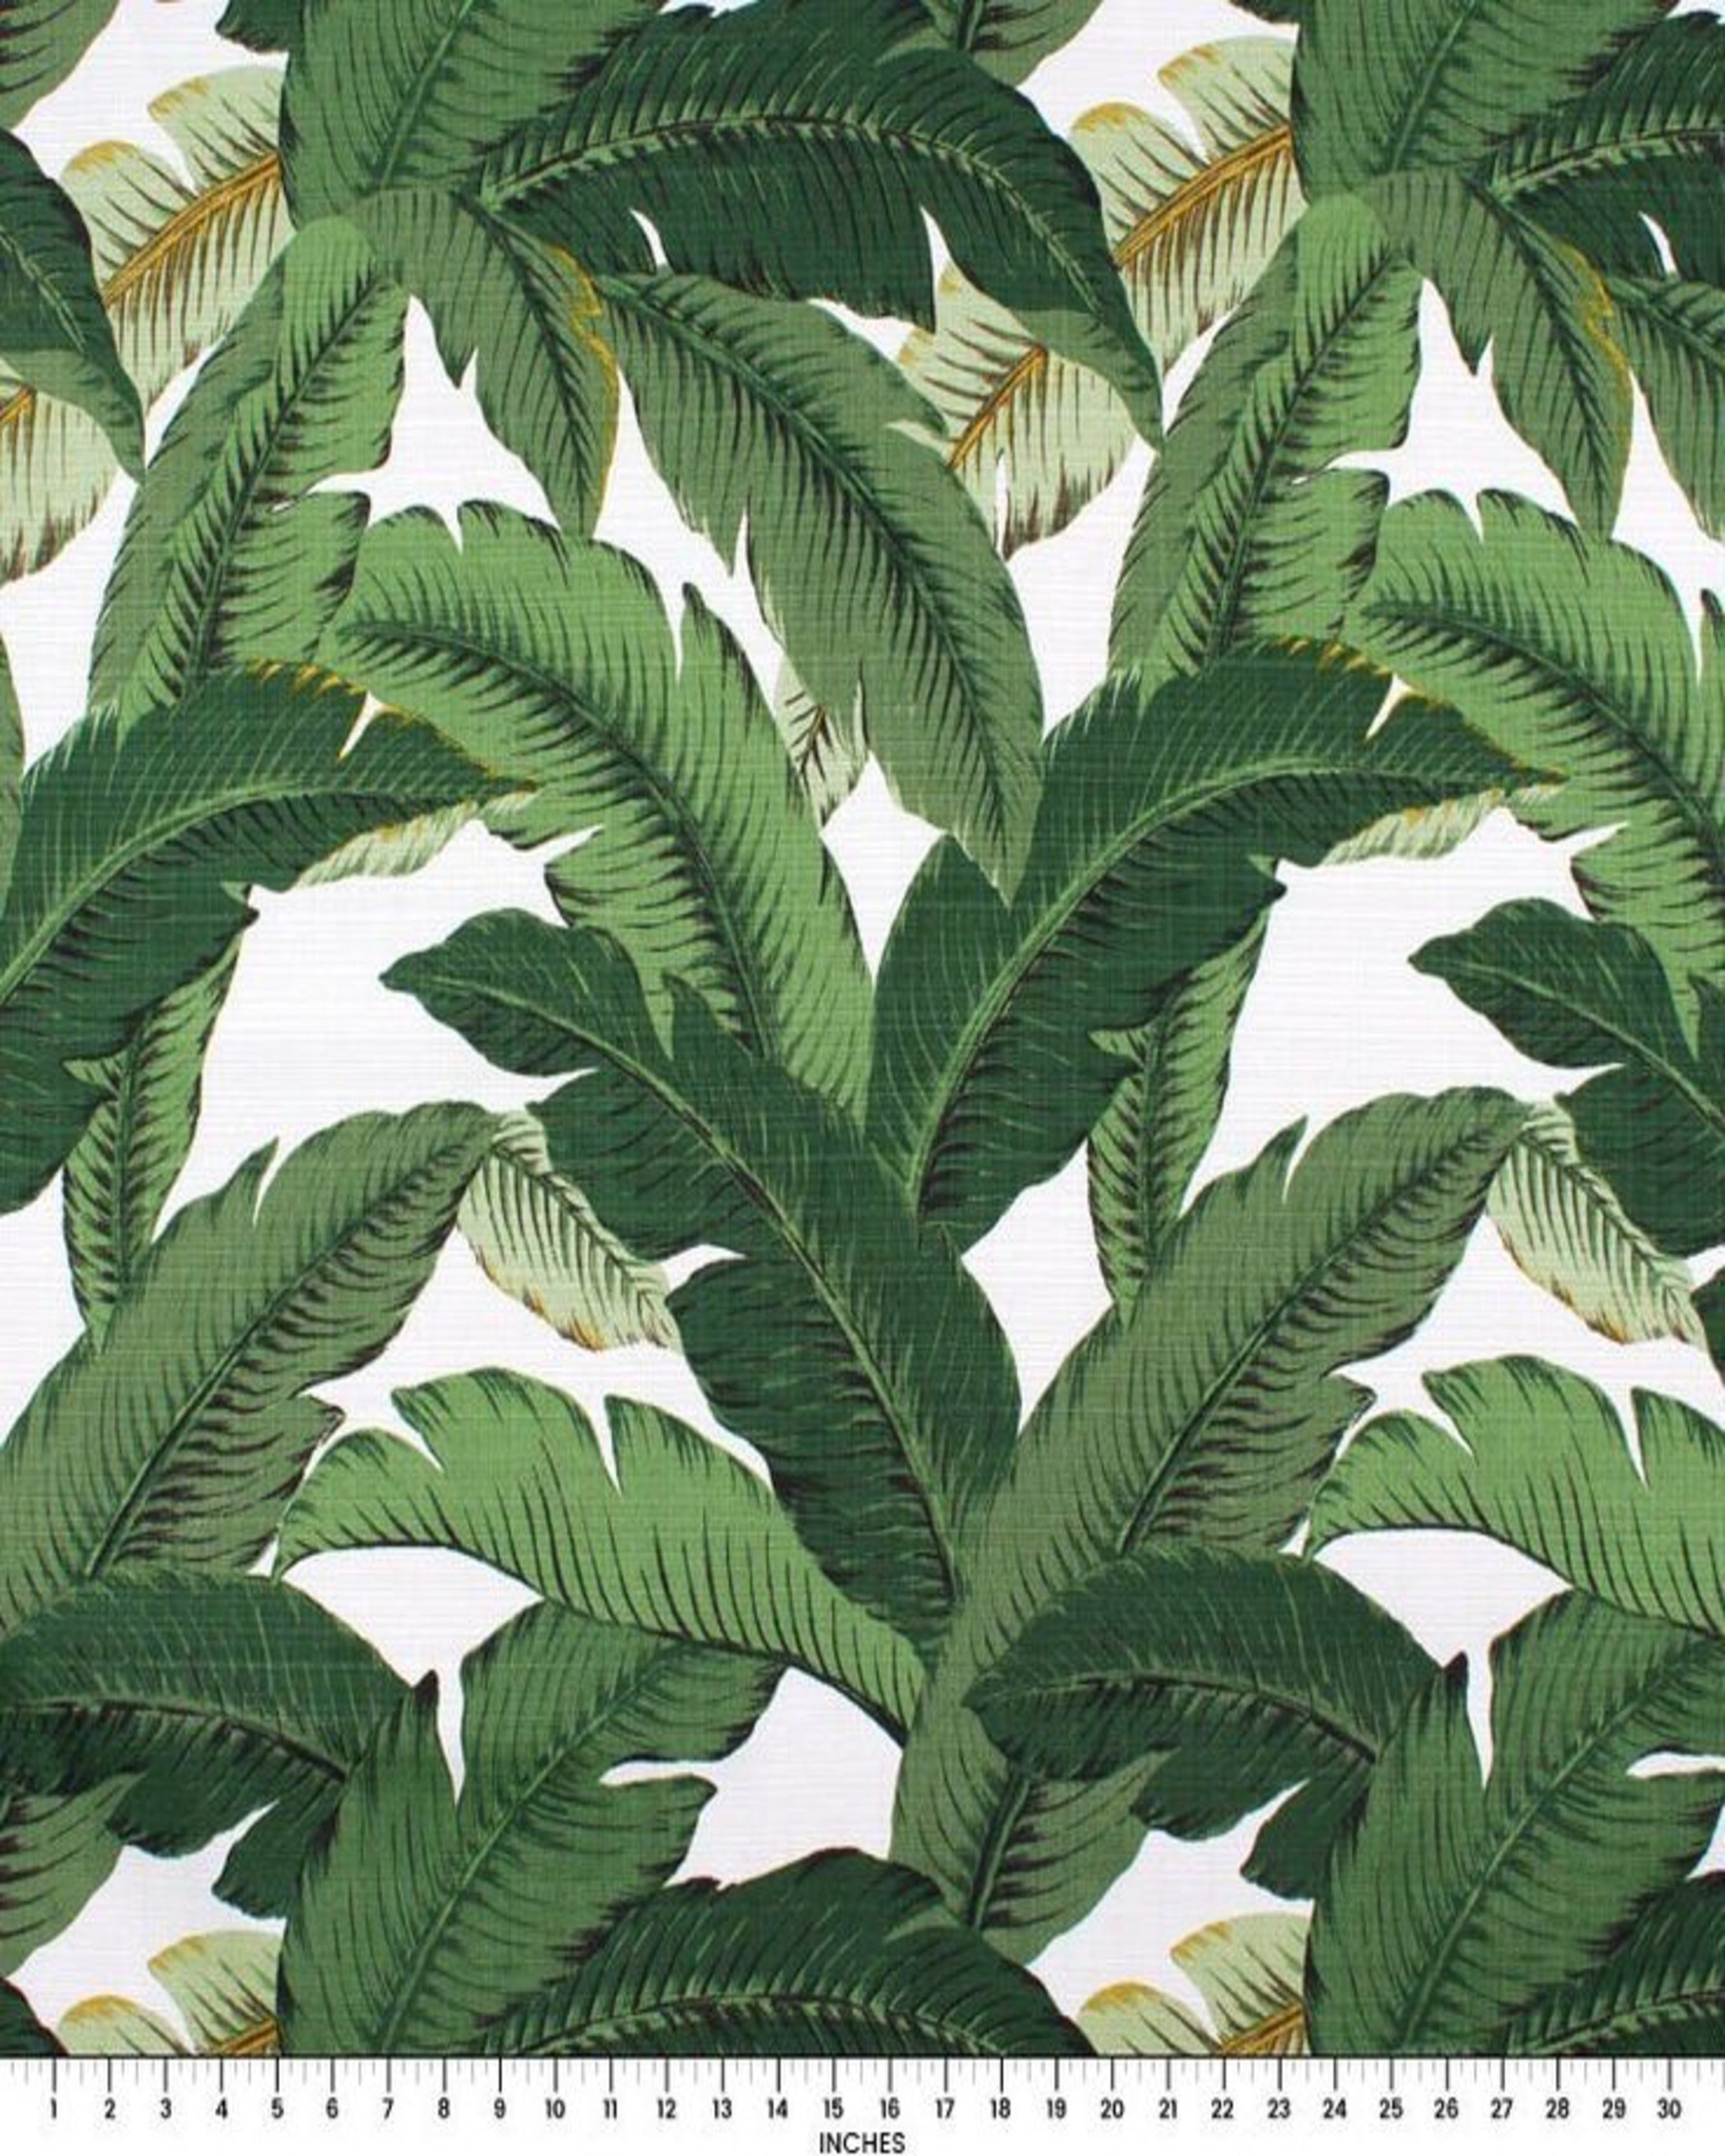 Jelly Palm Fabric ANGIE HOMES